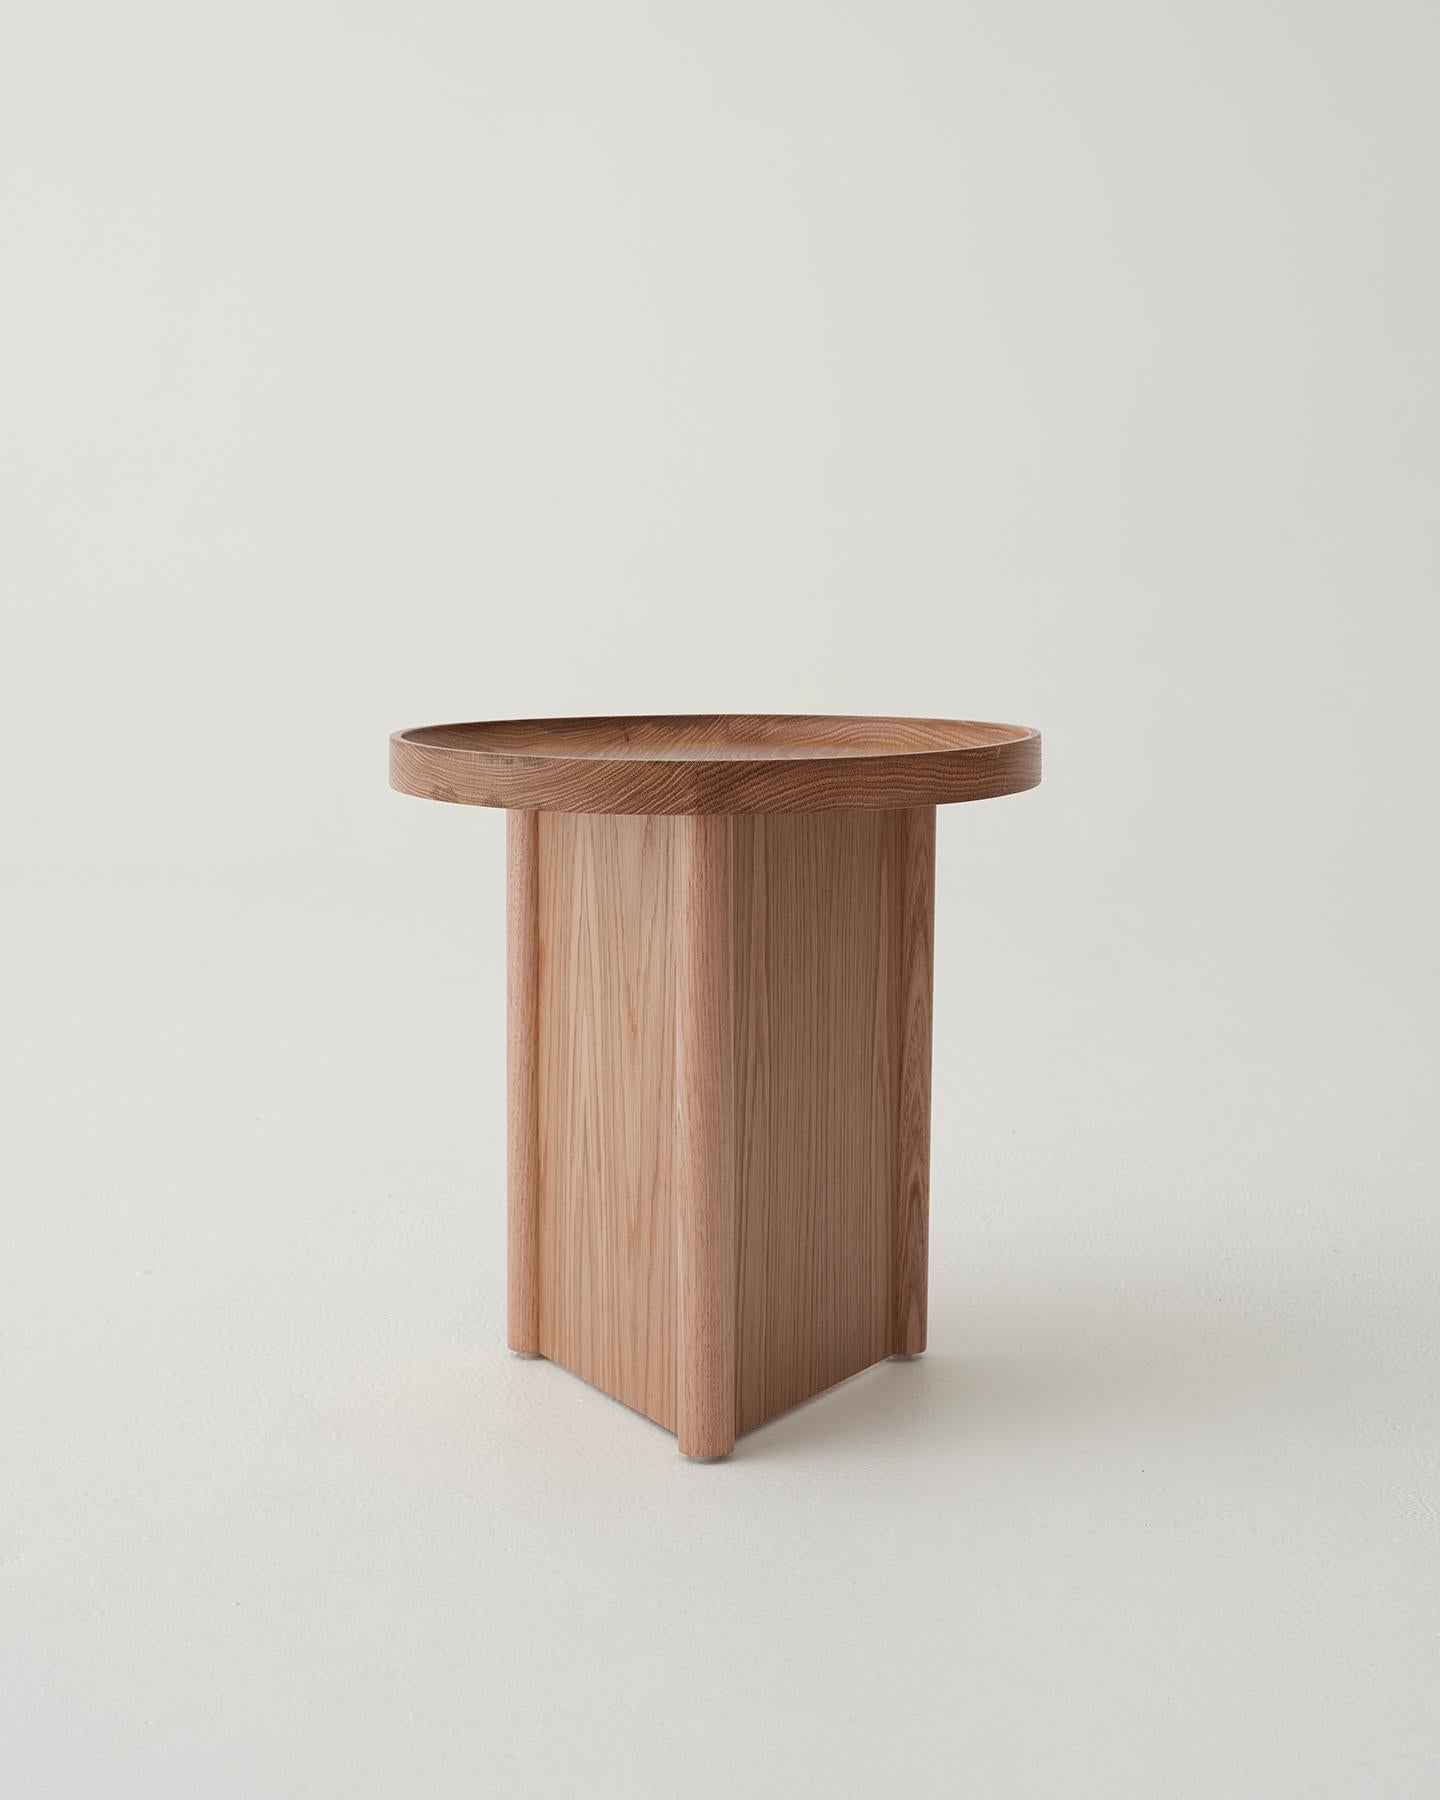 The Malibu side table is a derivative of the Malibu table range; the table re-interprets the classic shape of the surfboard with sumptuous edges that are pleasing to touch. Light-weight and versatile and available in custom finish options.

Our